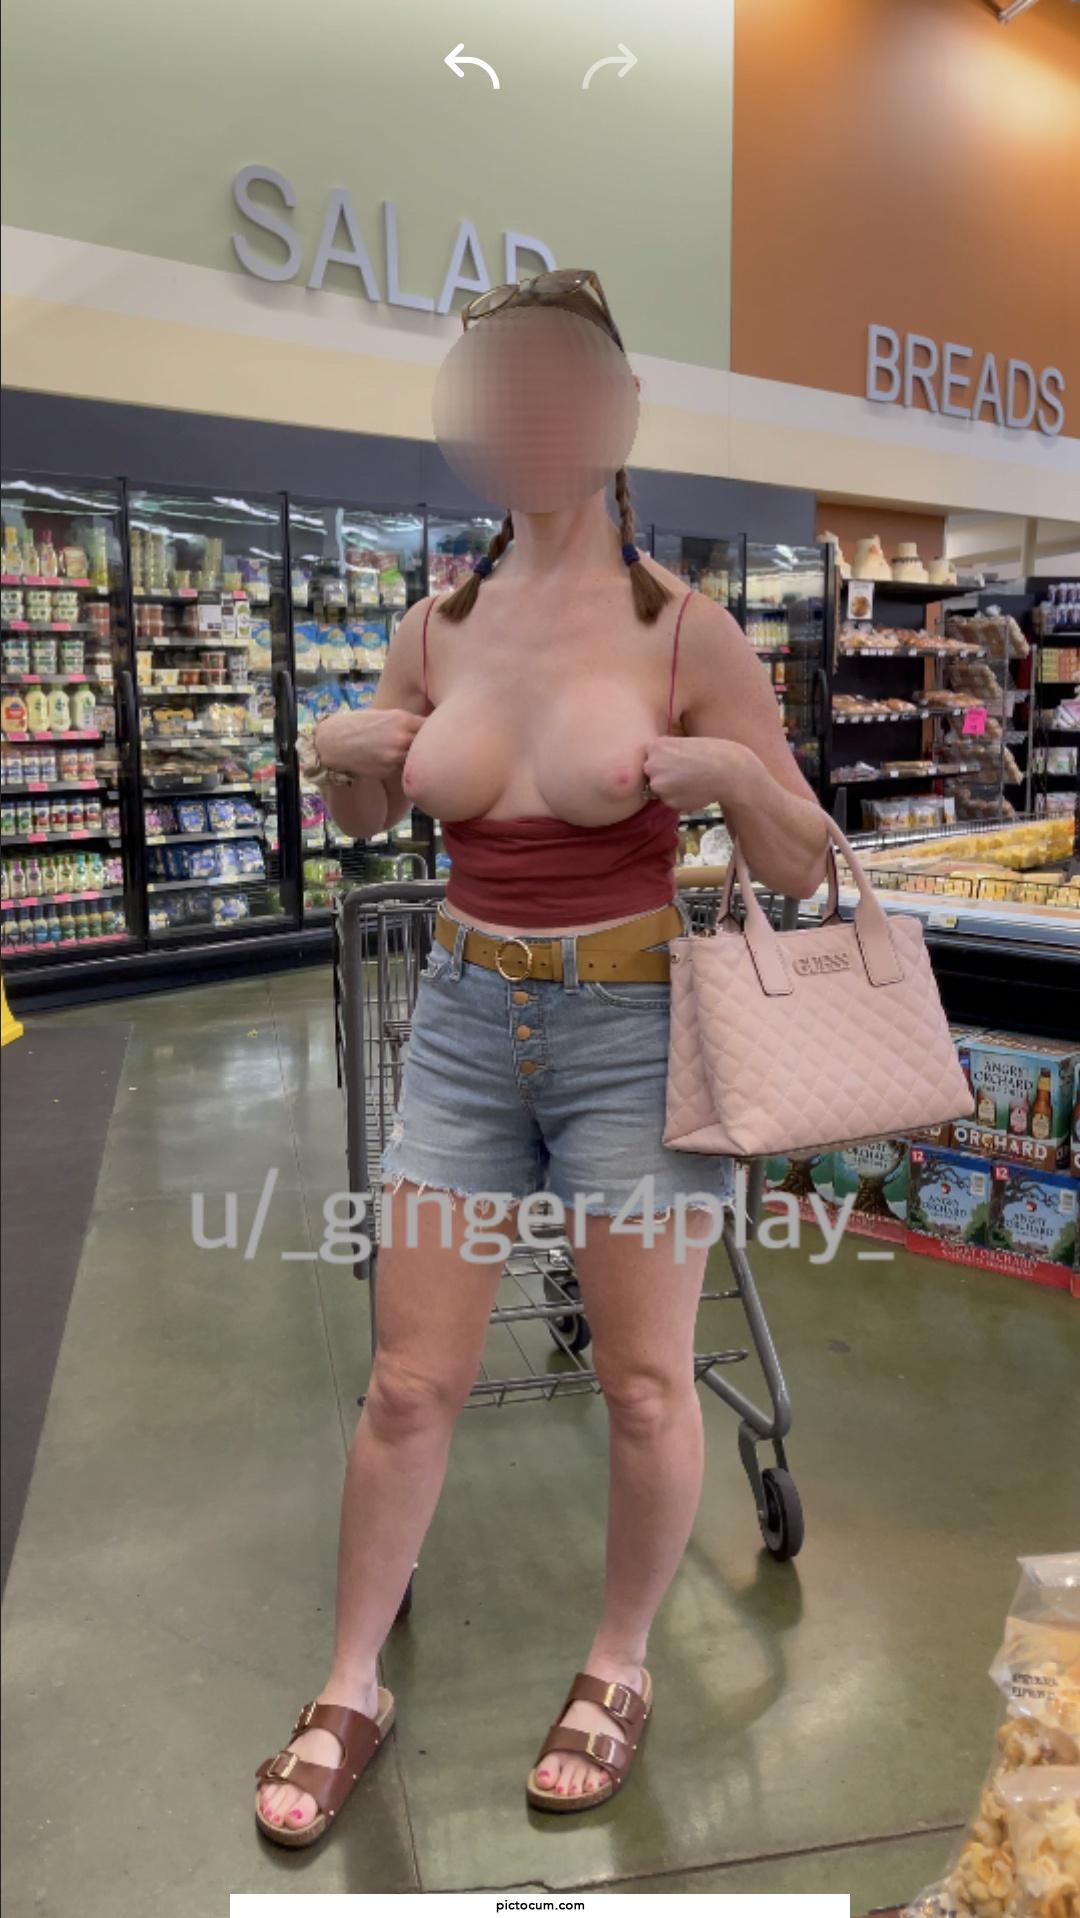 This is how a good little Milf shops